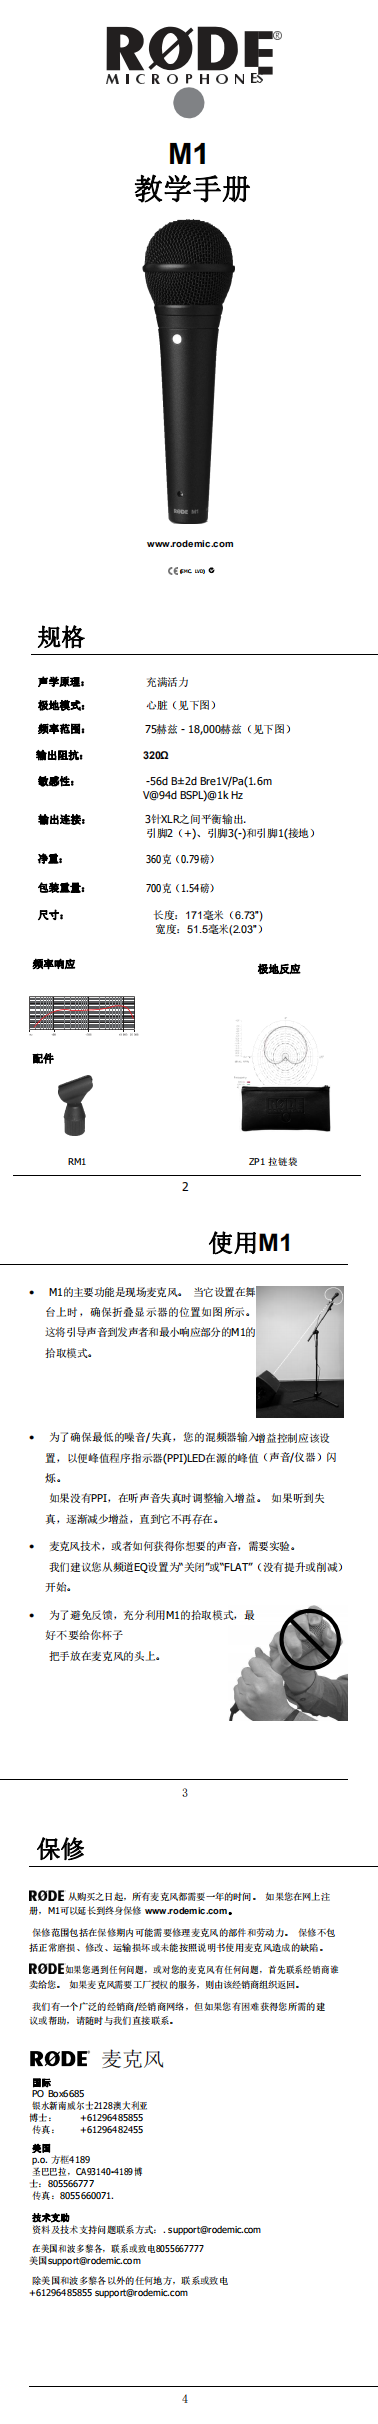 M1_product_manual_translate_Chinese_0.png